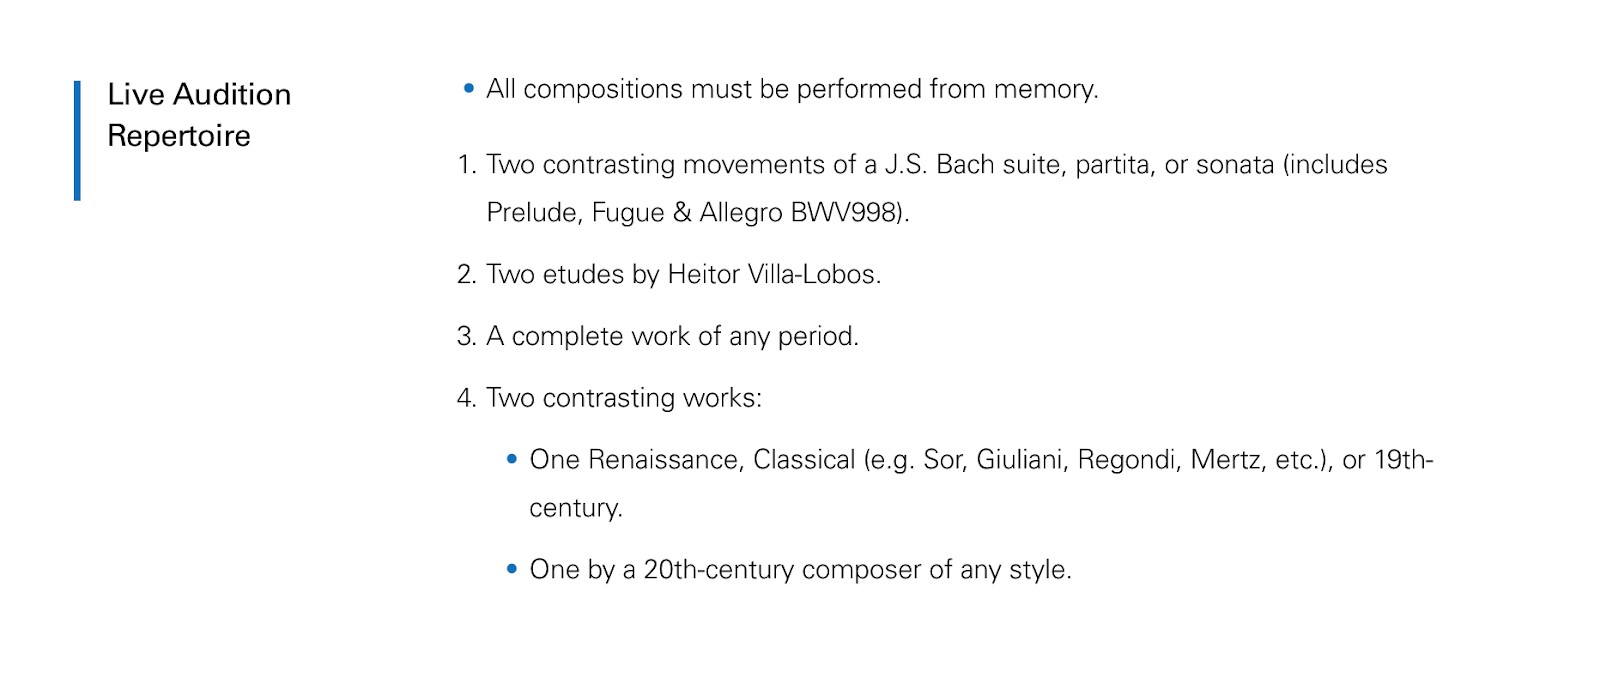 Live audition repertoire: All compositions must be performed from memory; 1. two contrasting movements of a J.S. Bach suite, partita, or sonata (includes Prelude, Fugue and Allegro BWV998); 2. two etudes by Heitor Villa-Lobos; 3. A complete work of any period; 4. Two contrasting works: one Renaissance, Classical (Sor, Giuliani, Regondi, Mertz, etc.) or 19th Century; one by a 20th century composer of any style.